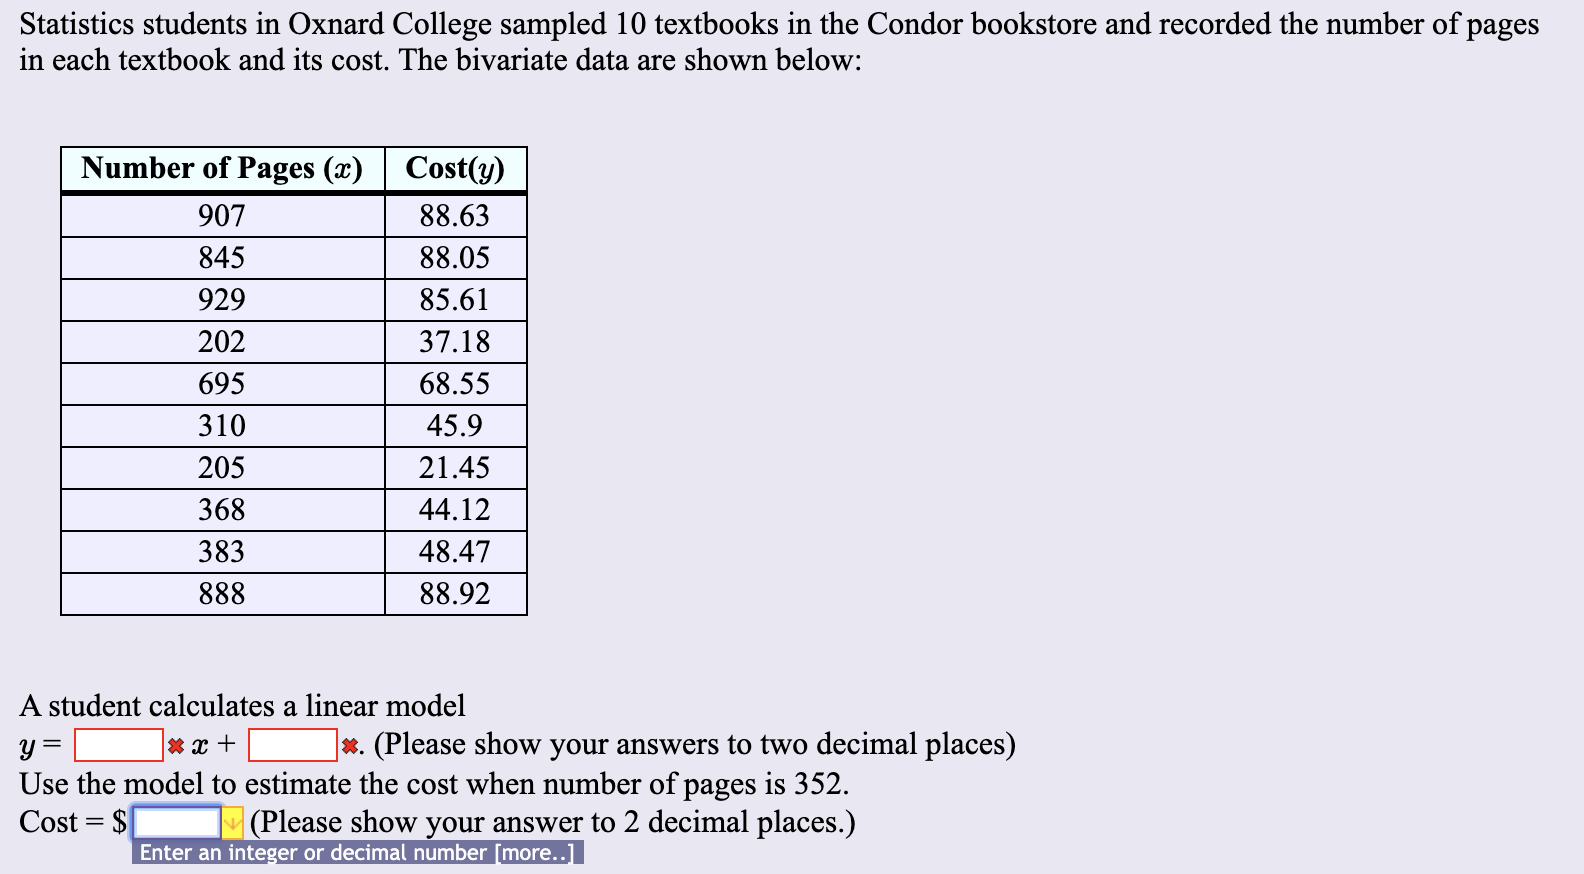 Statistics students in Oxnard College sampled 10 textbooks in the Condor bookstore and recorded the number of pages
in each textbook and its cost. The bivariate data are shown below:
Number of Pages (x)
Cost(y)
907
88.63
845
88.05
85.61
929
202
37.18
695
68.55
310
45.9
205
21.45
368
44.12
48.47
383
888
88.92
A student calculates a linear model
(Please show your answers to two decimal places)
X.
Use the model to estimate the cost when number of pages is 352.
Cost $
(Please show your answer to 2 decimal places.)
Enter an integer or decimal number [more..]
